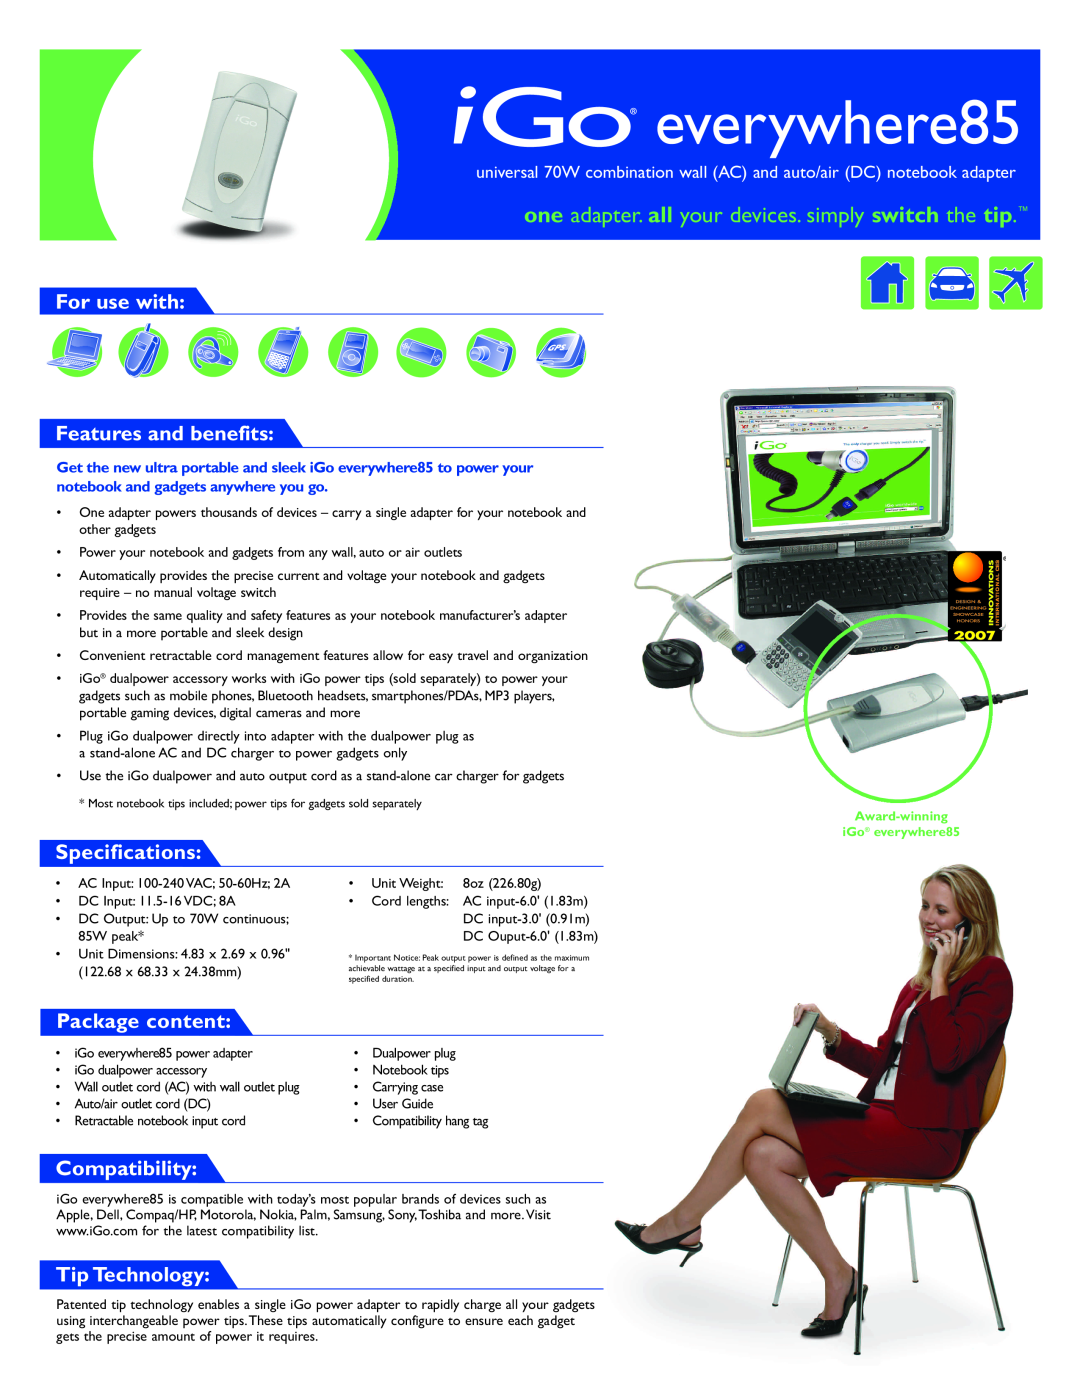 Compaq everywhere85 specifications For use with Features and benefits, Specifications, Package content, Compatibility 